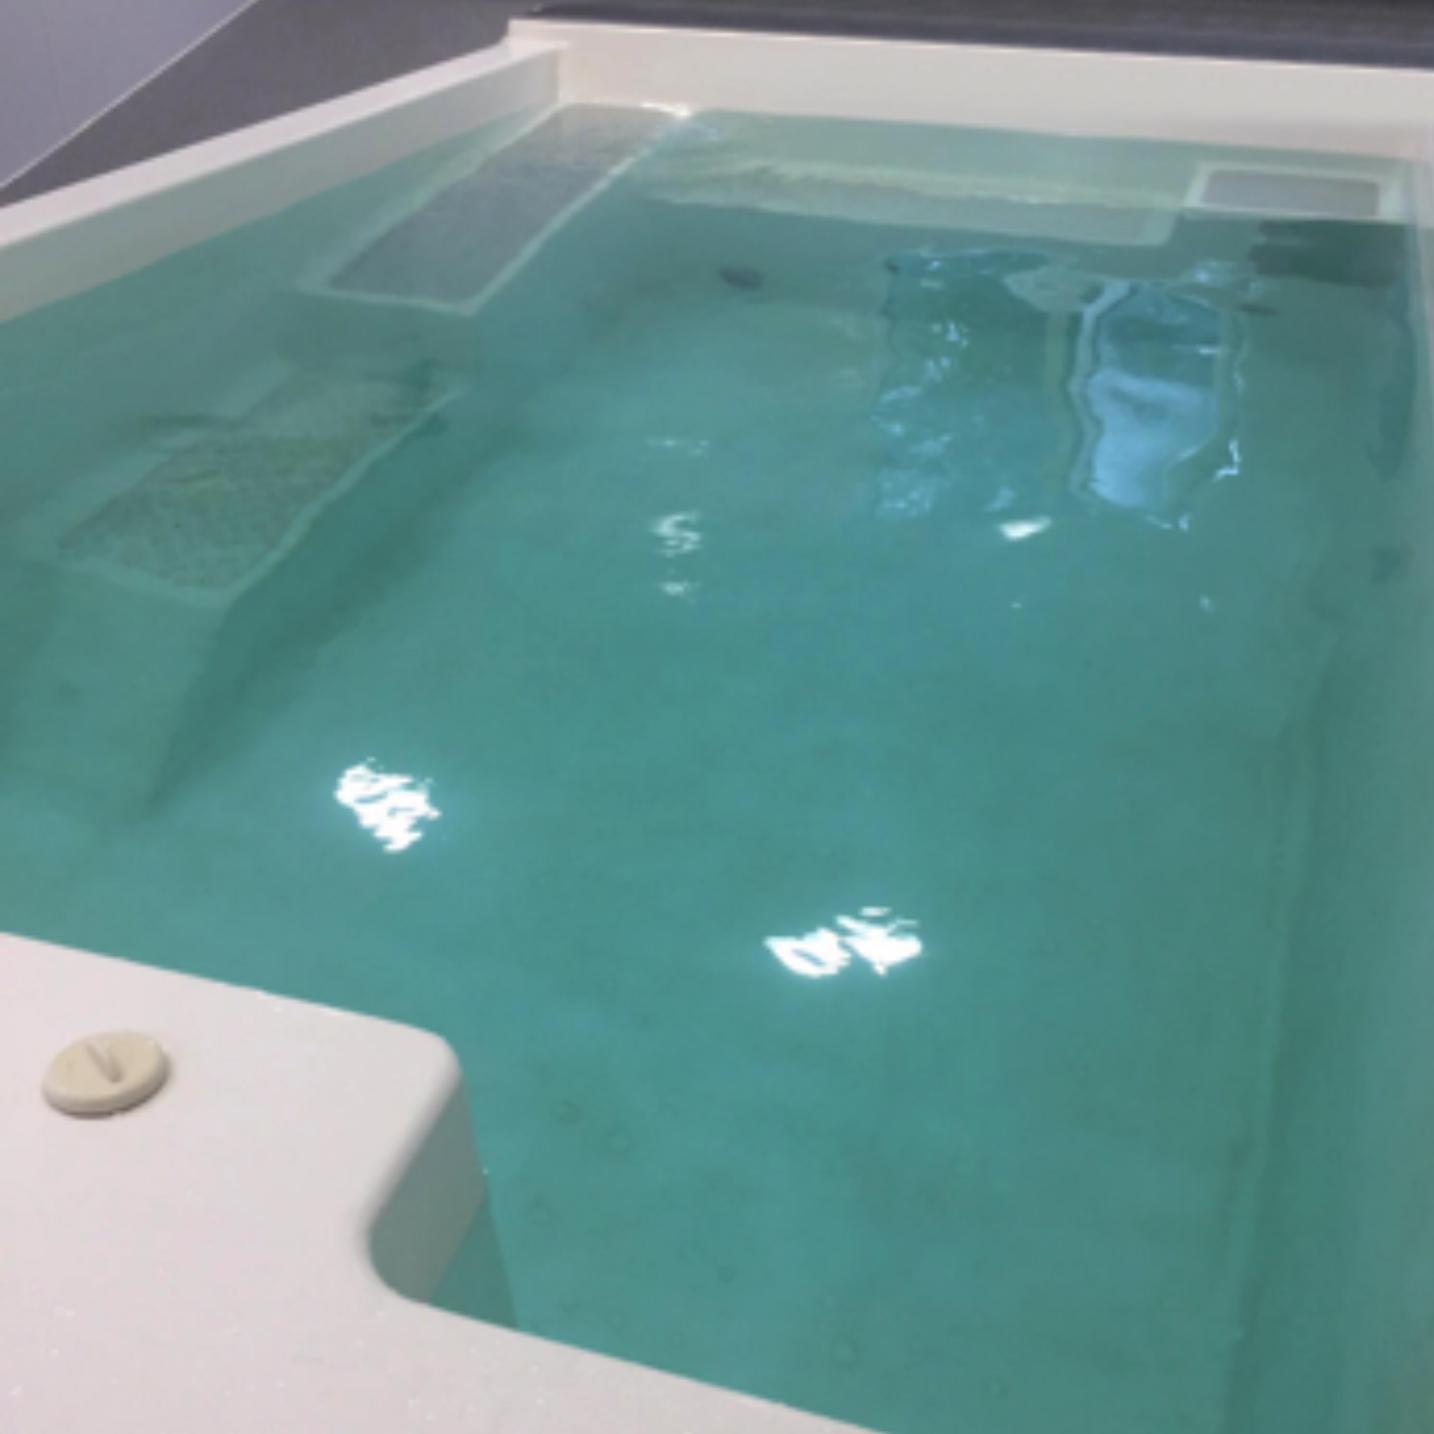 Pool Facilities hydrotherapy image